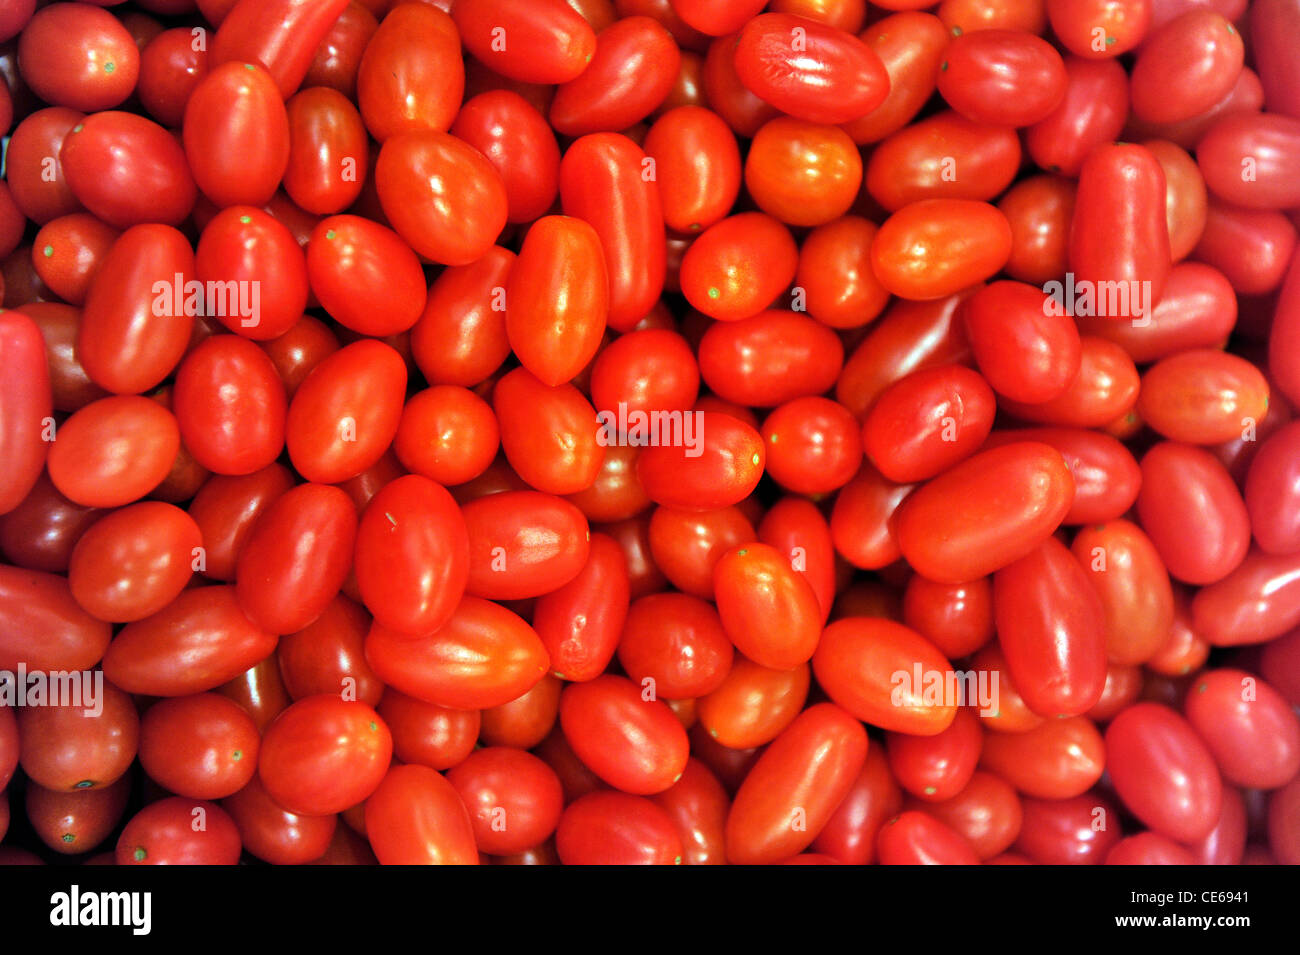 Close up view of 'coeur de pigeon' tomatoes on display in a supermarket. Stock Photo